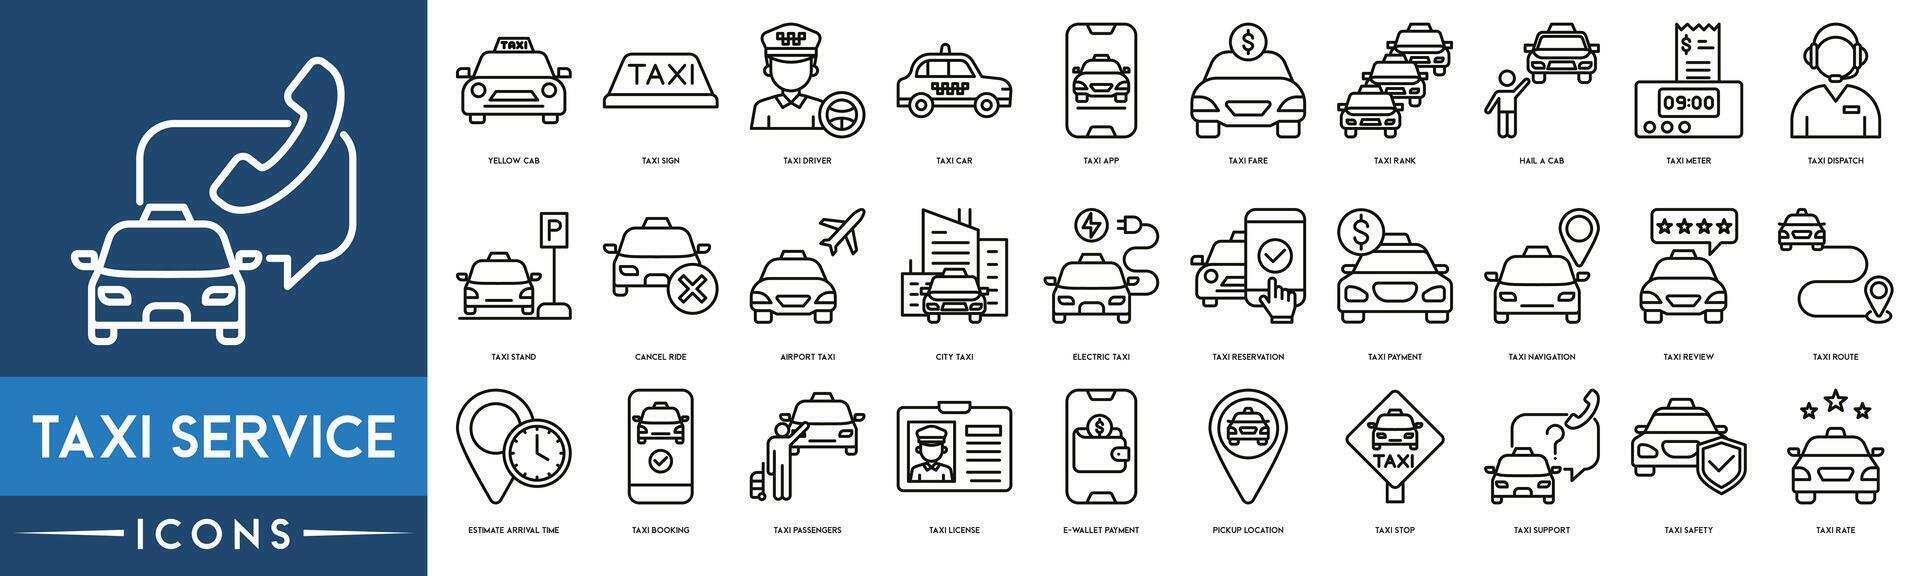 Taxi Service icon. Yellow Cab, Taxi Sign, Driver, Car, Taxi App, Fare, Rank, Hail a Cab, Taxi Meter and Dispatch icon set. vector